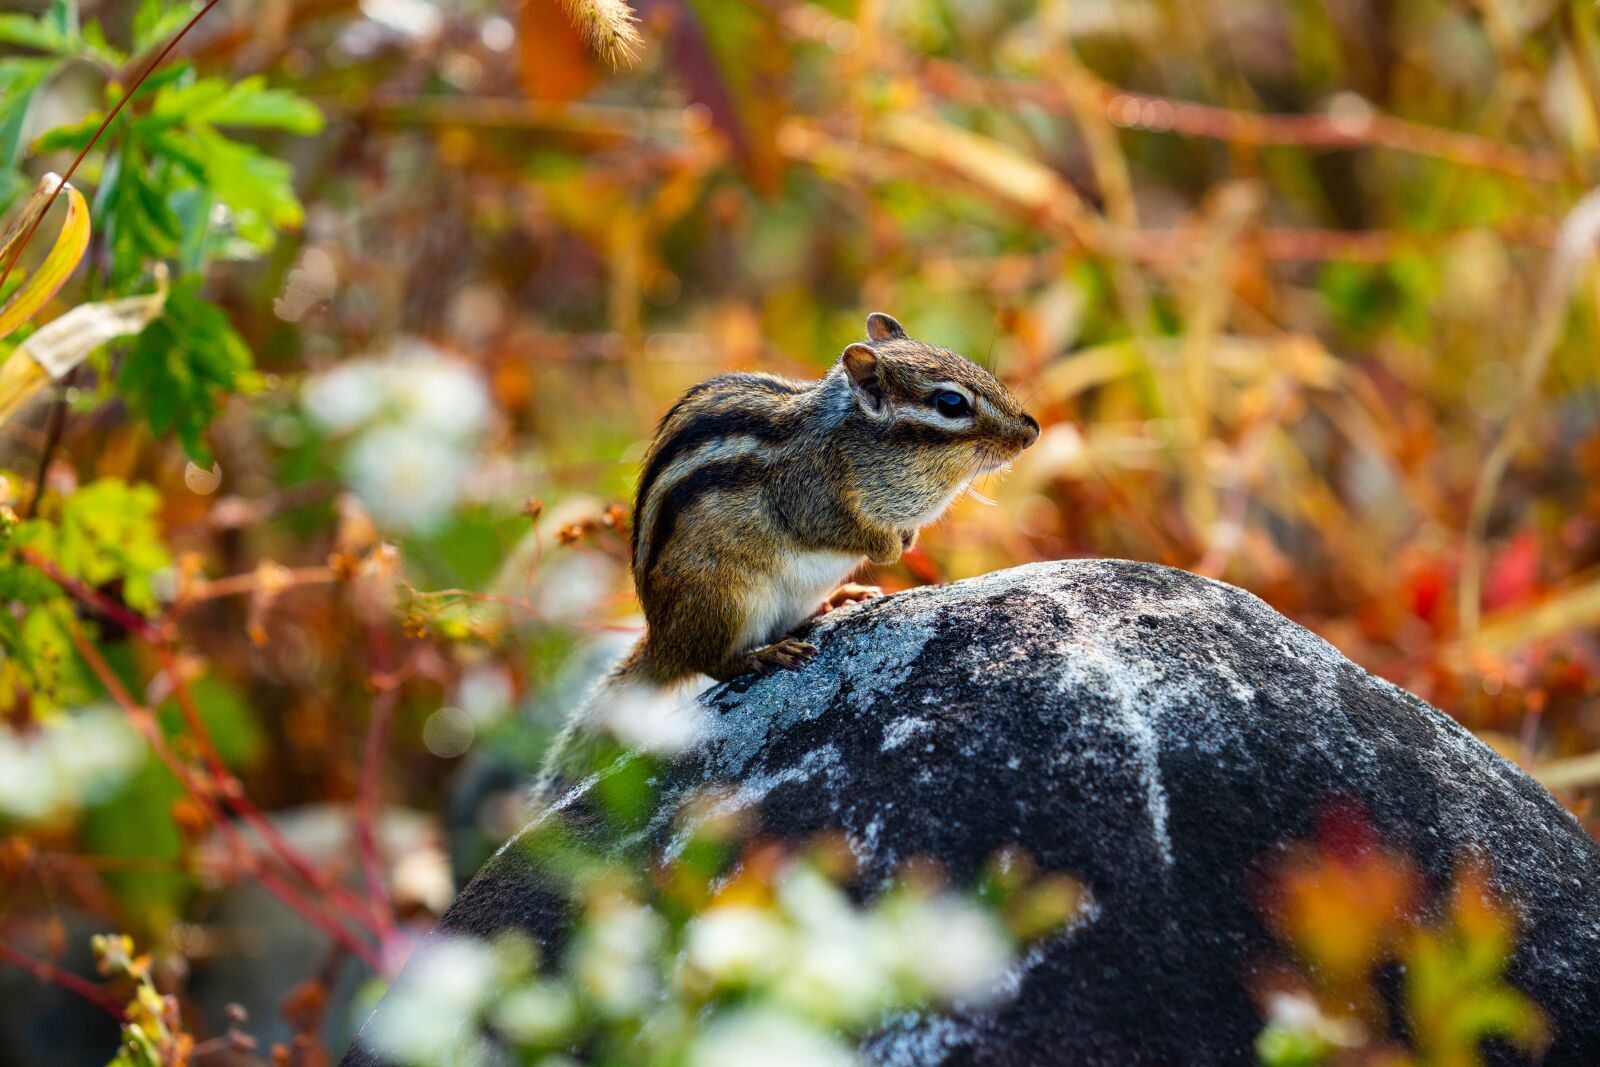 Sony a99 II sample photo. Squirrel, autumn, outdoor photography